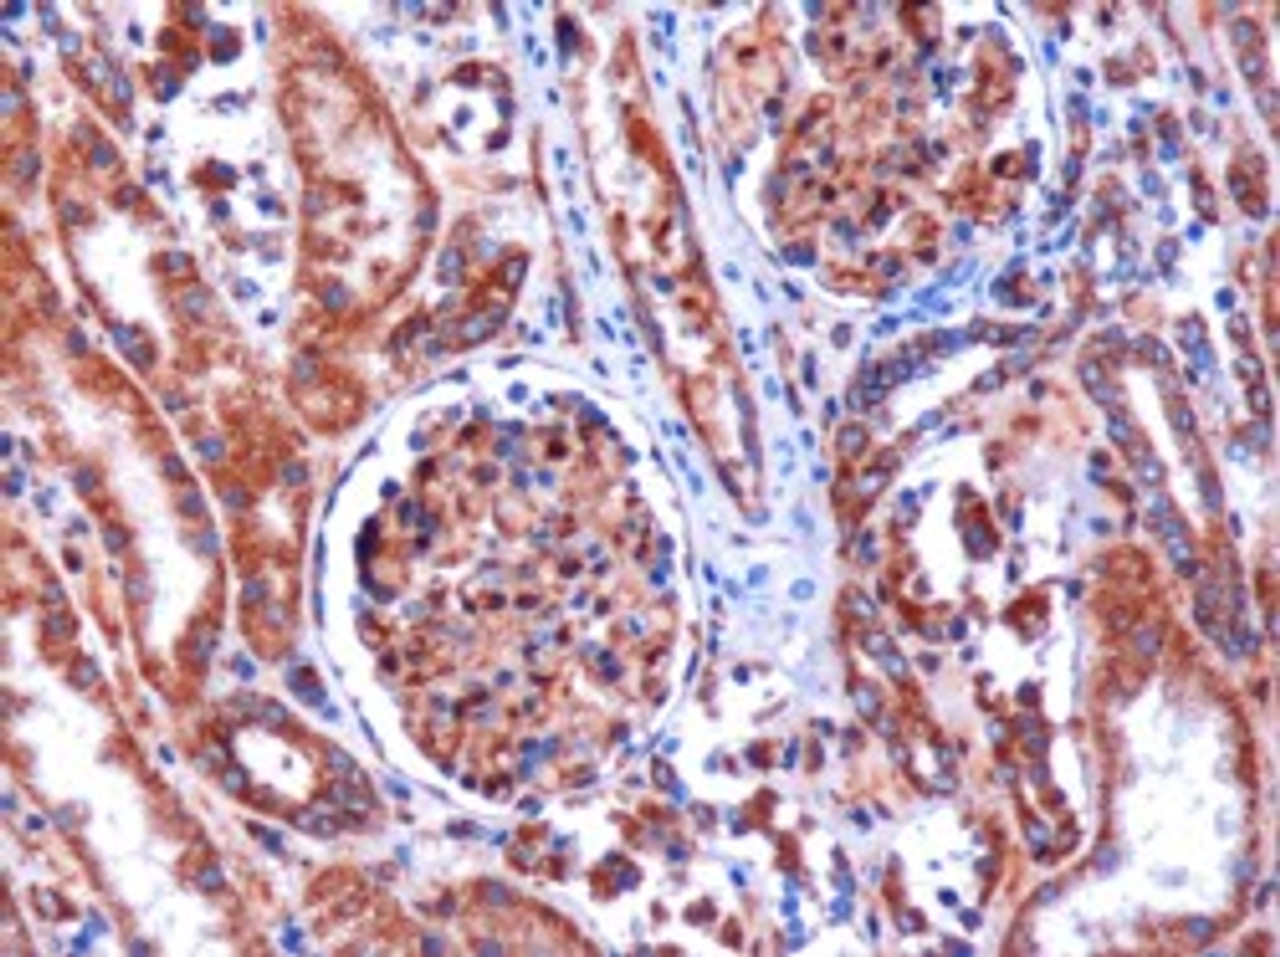 45-077 (1ug/ml) staining of paraffin embedded Human Kidney. Microwaved antigen retrieval with Tris/EDTA buffer pH9, HRP-staining. <strong>This data is from a previous batch, not on sale.</strong>